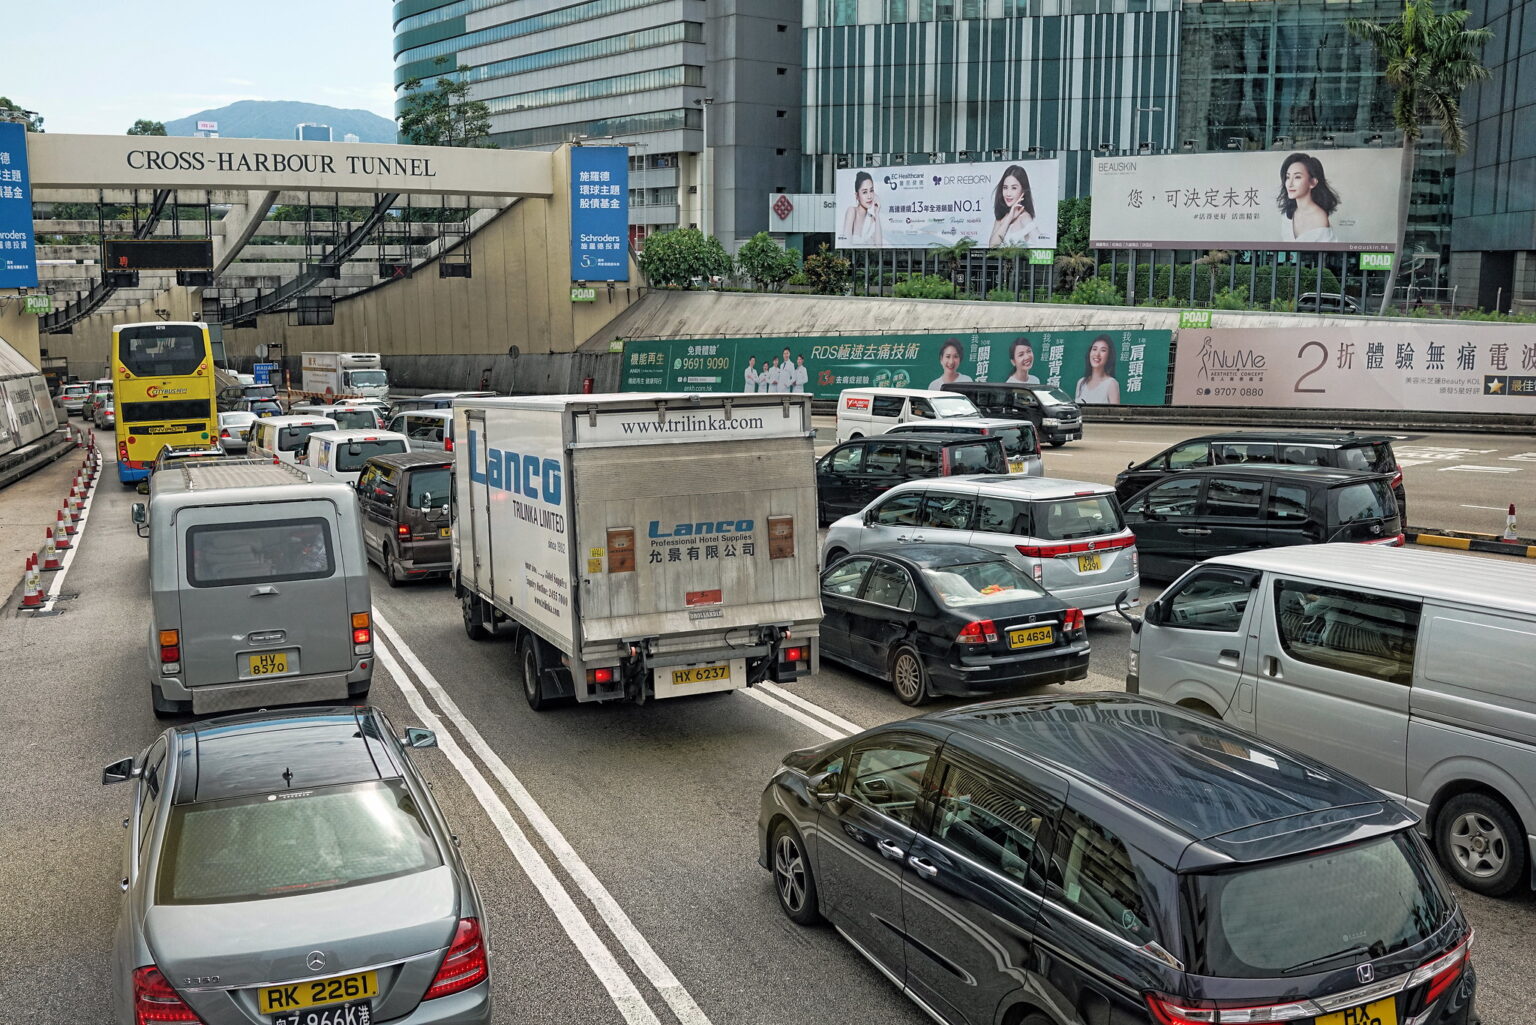 Traffic congestion at the entrabnce of the Cross-Harbour Tunnel in Hong Kong.